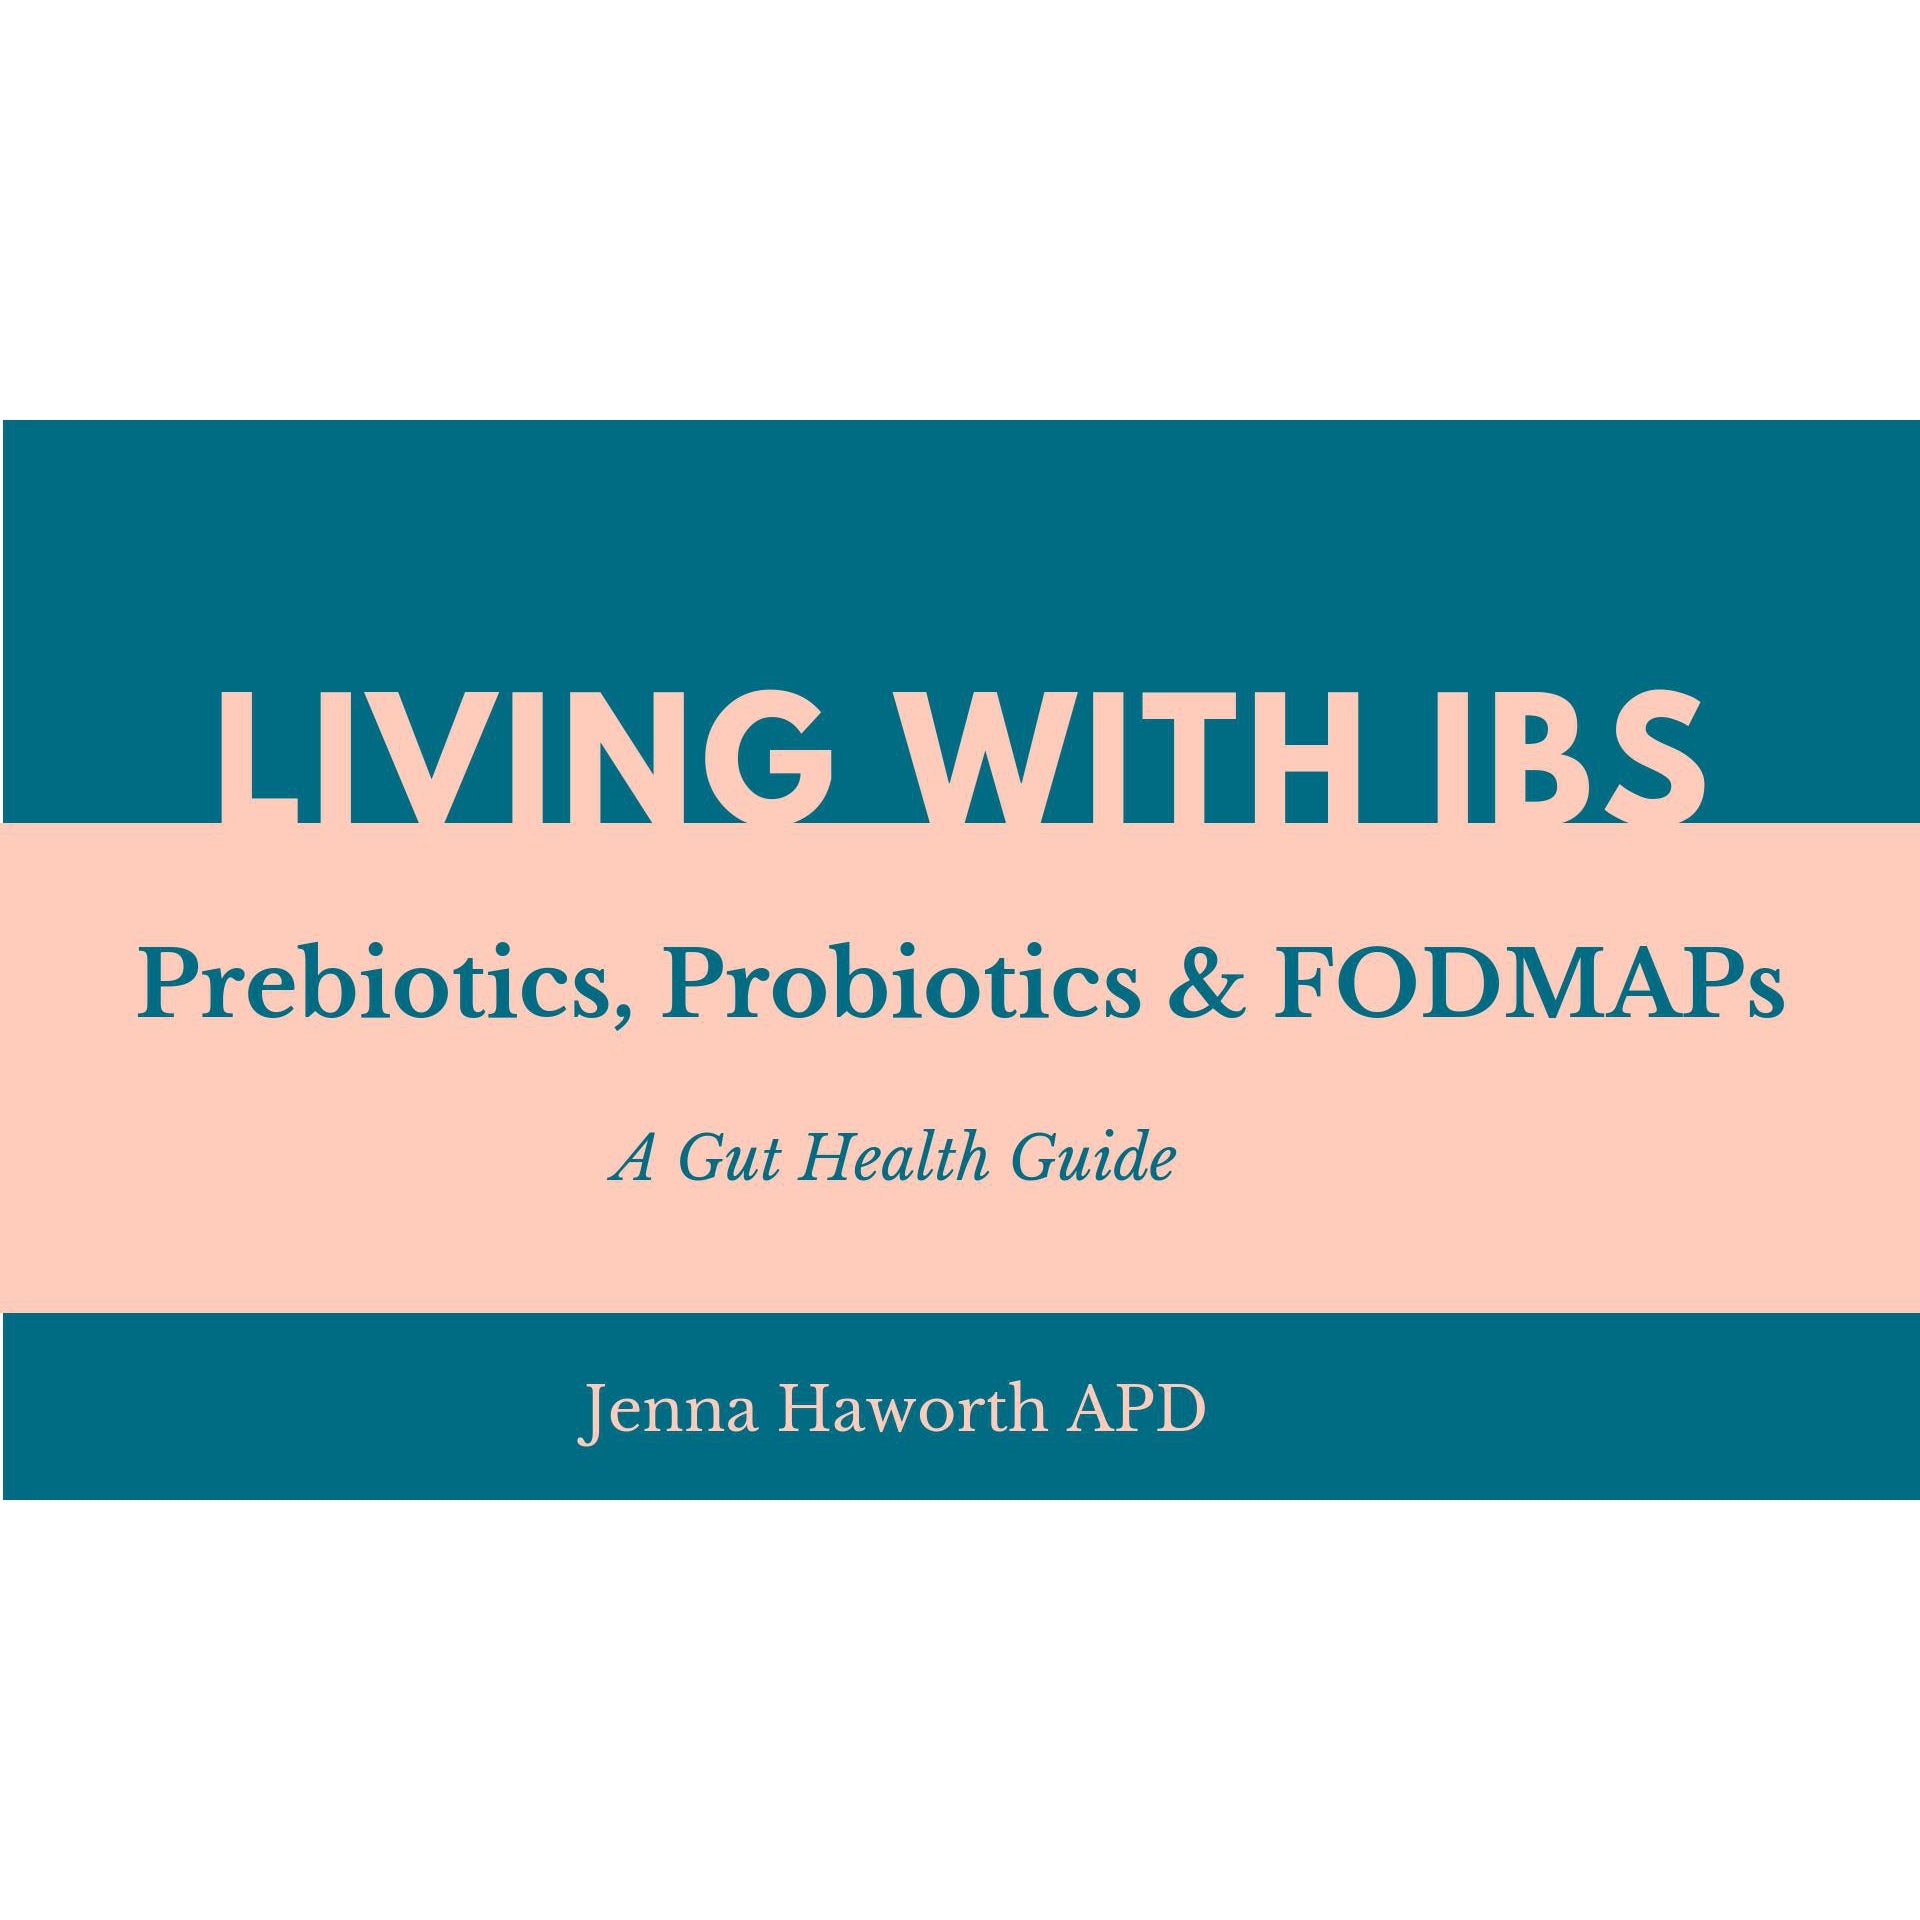 Living with IBS: A Gut Health Guide